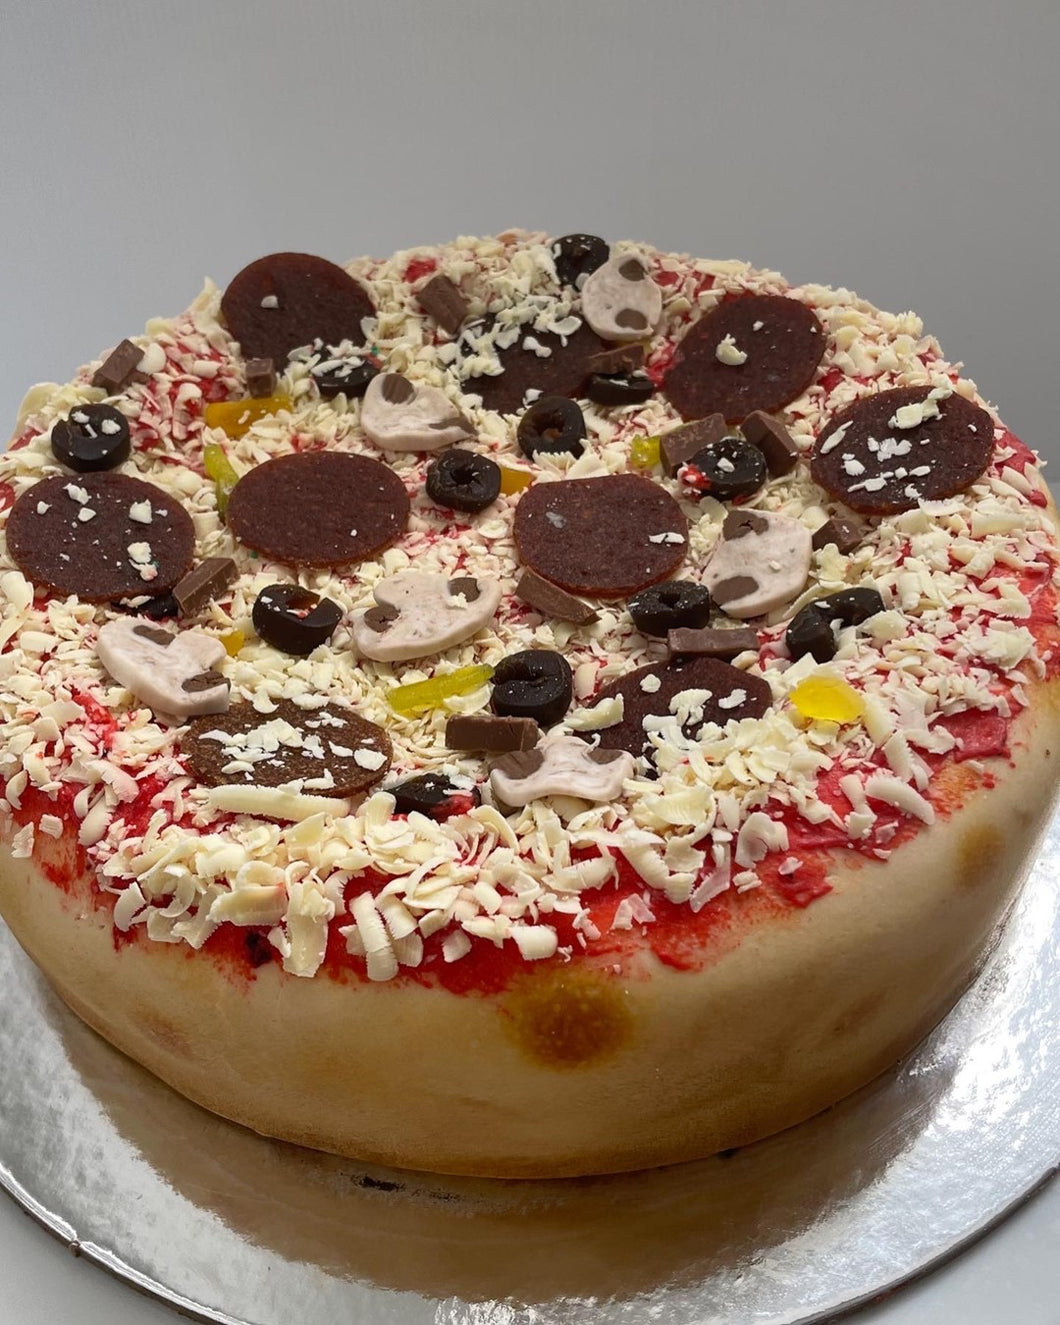 Pizza Themed Cake Make-Up... - Detailed Sugar Cakes and More | Facebook